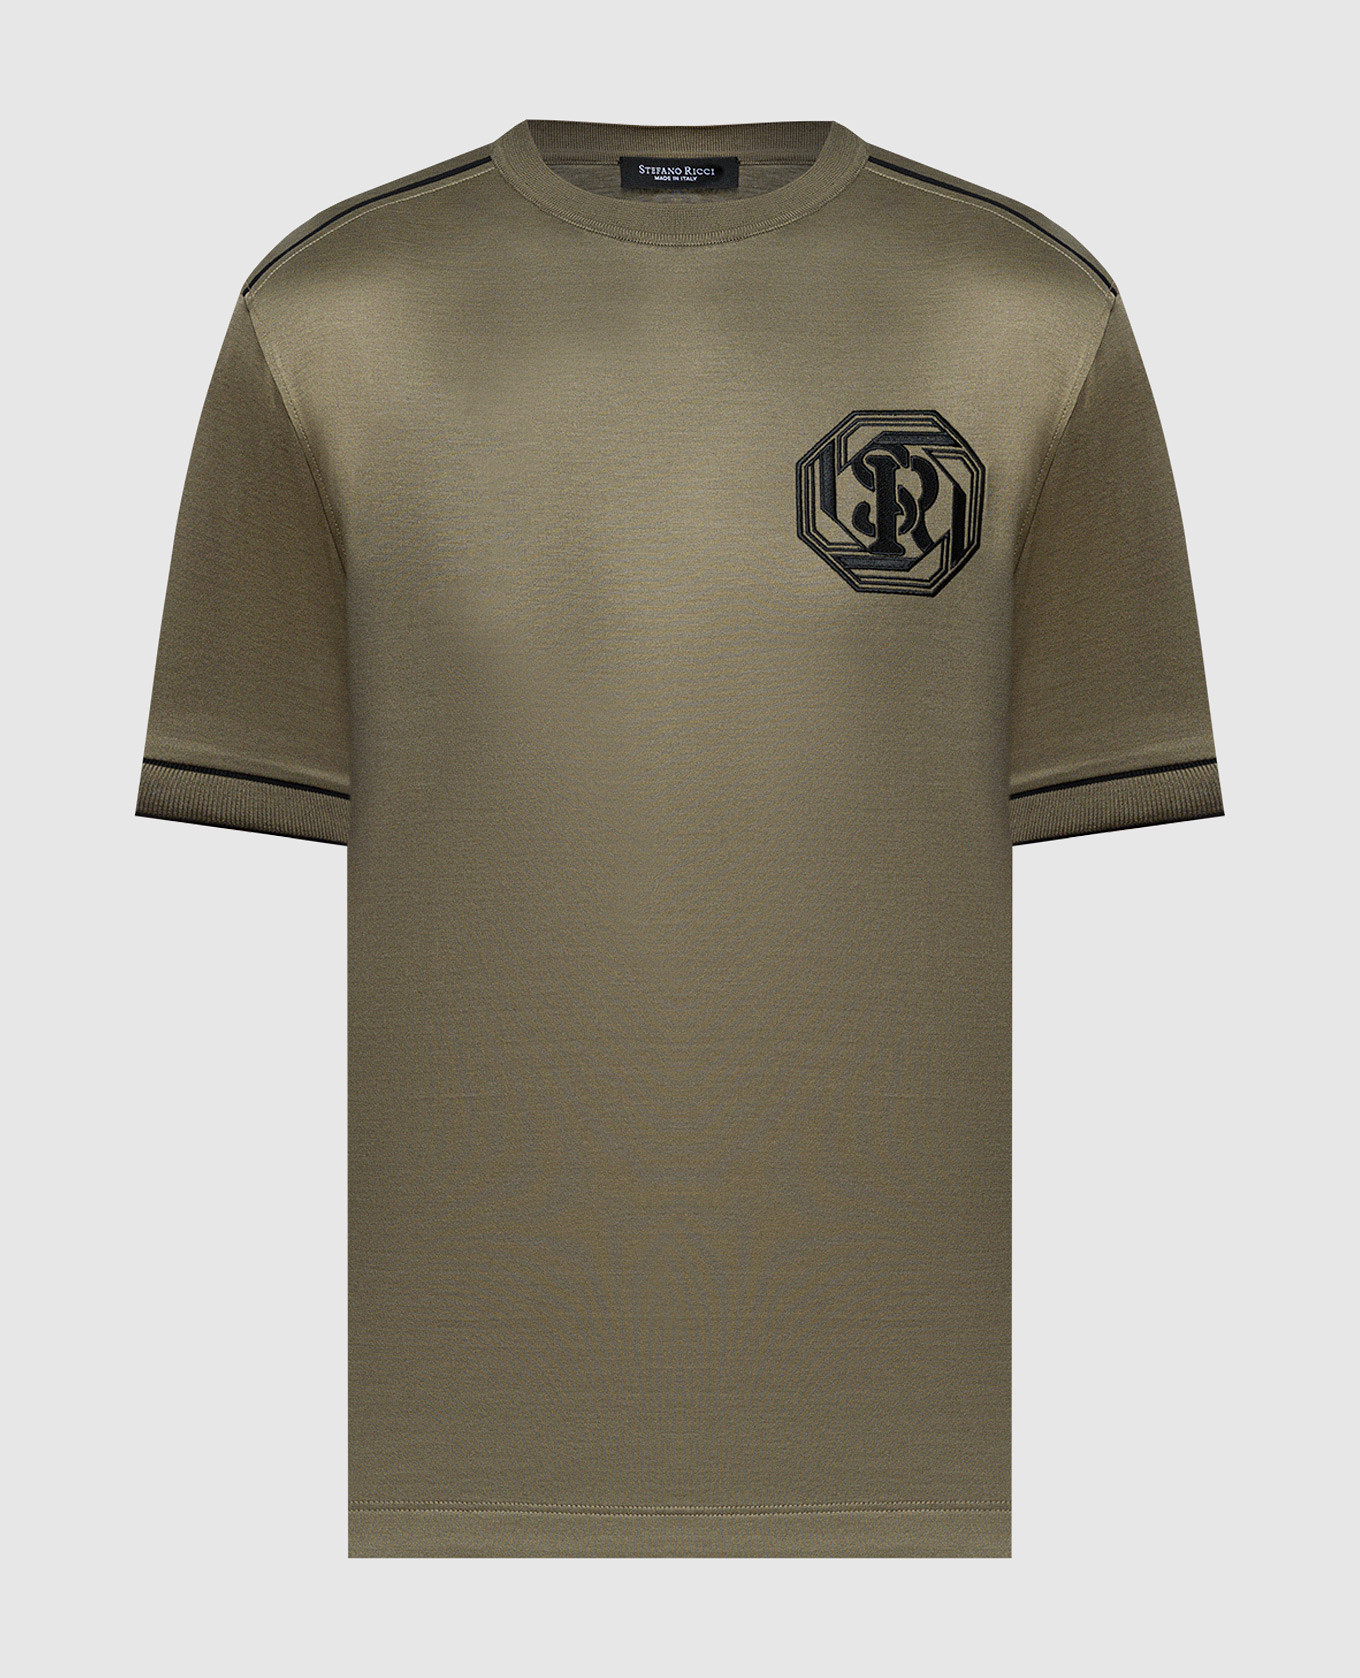 Green t-shirt with logo monogram embroidery